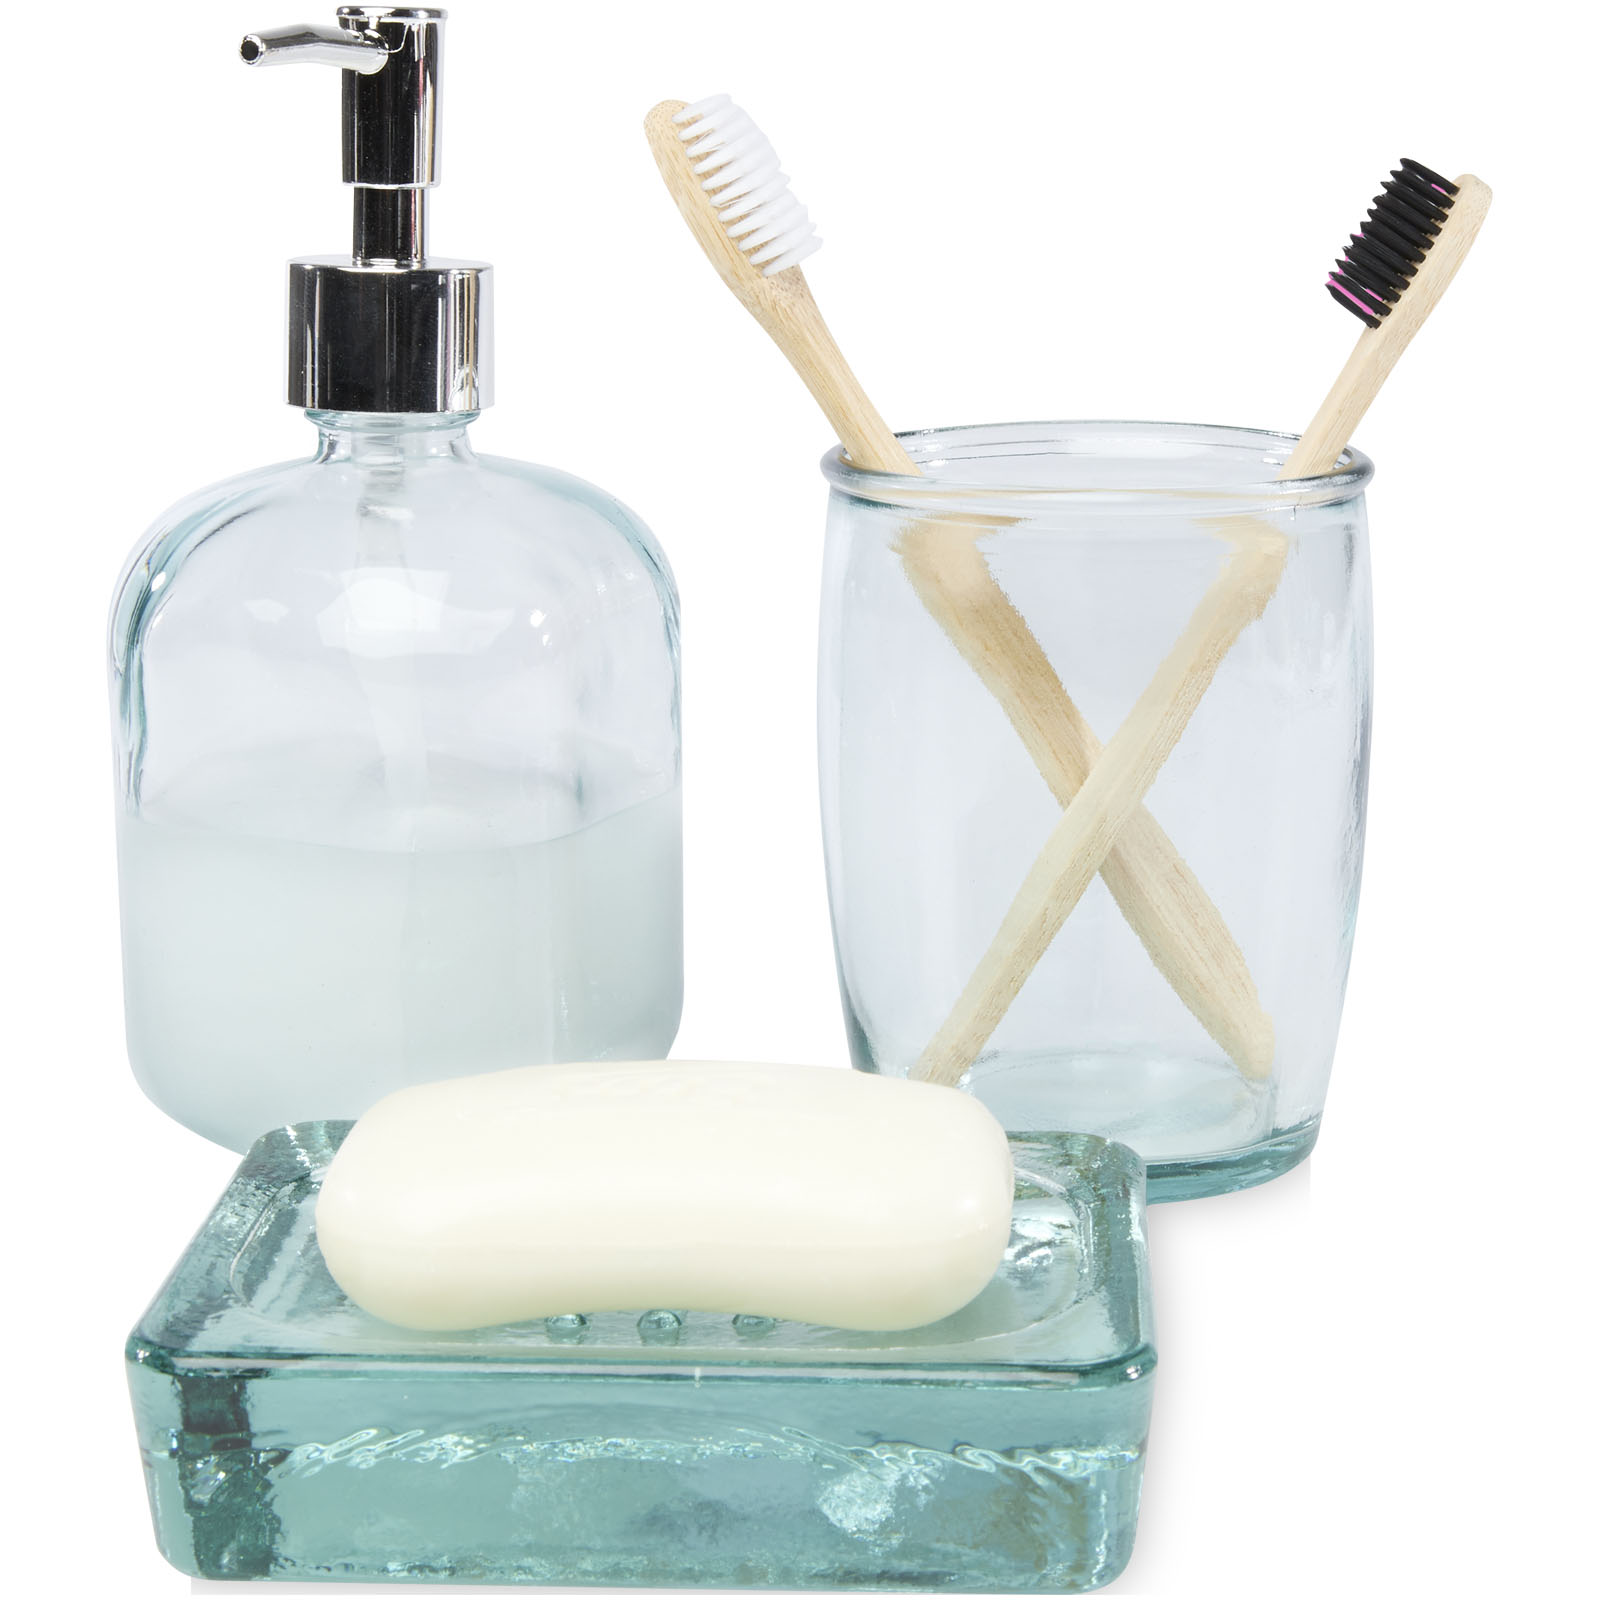 Advertising Home Accessories - Jabony 3-piece recycled glass bathroom set - 3